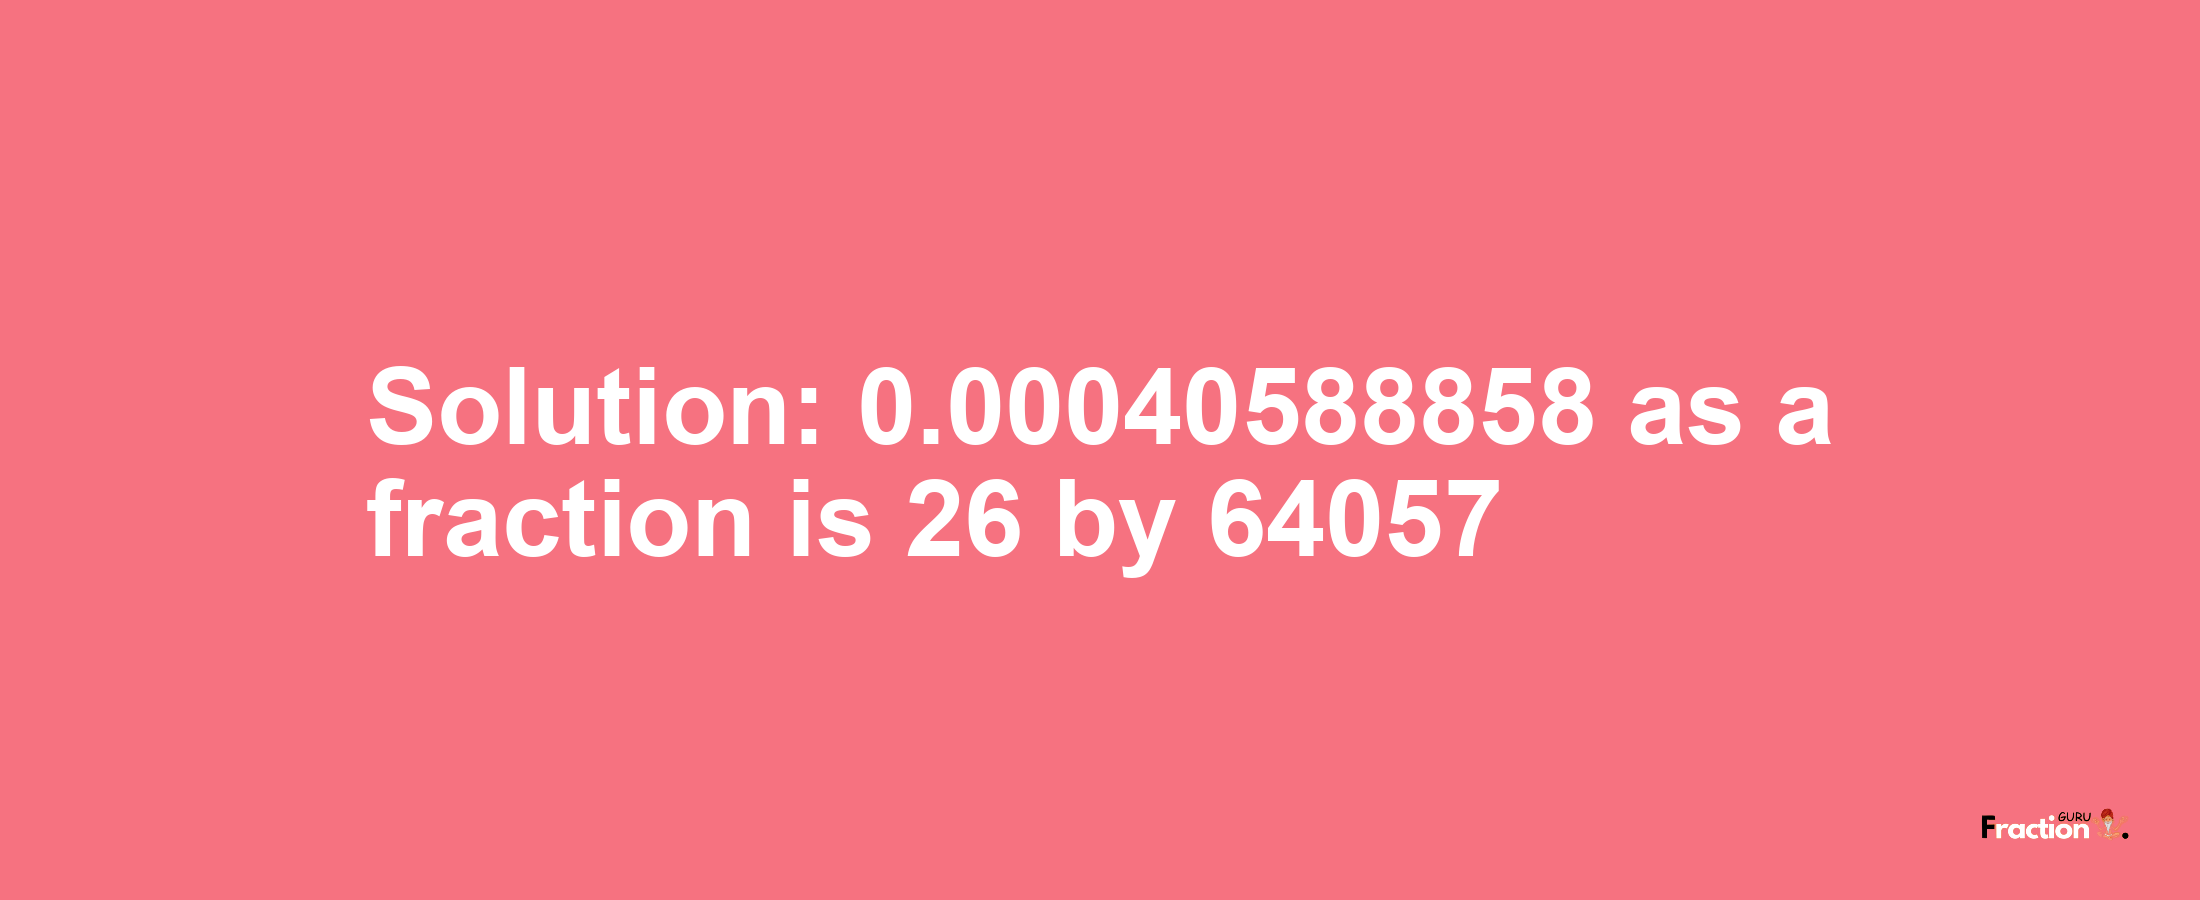 Solution:0.00040588858 as a fraction is 26/64057